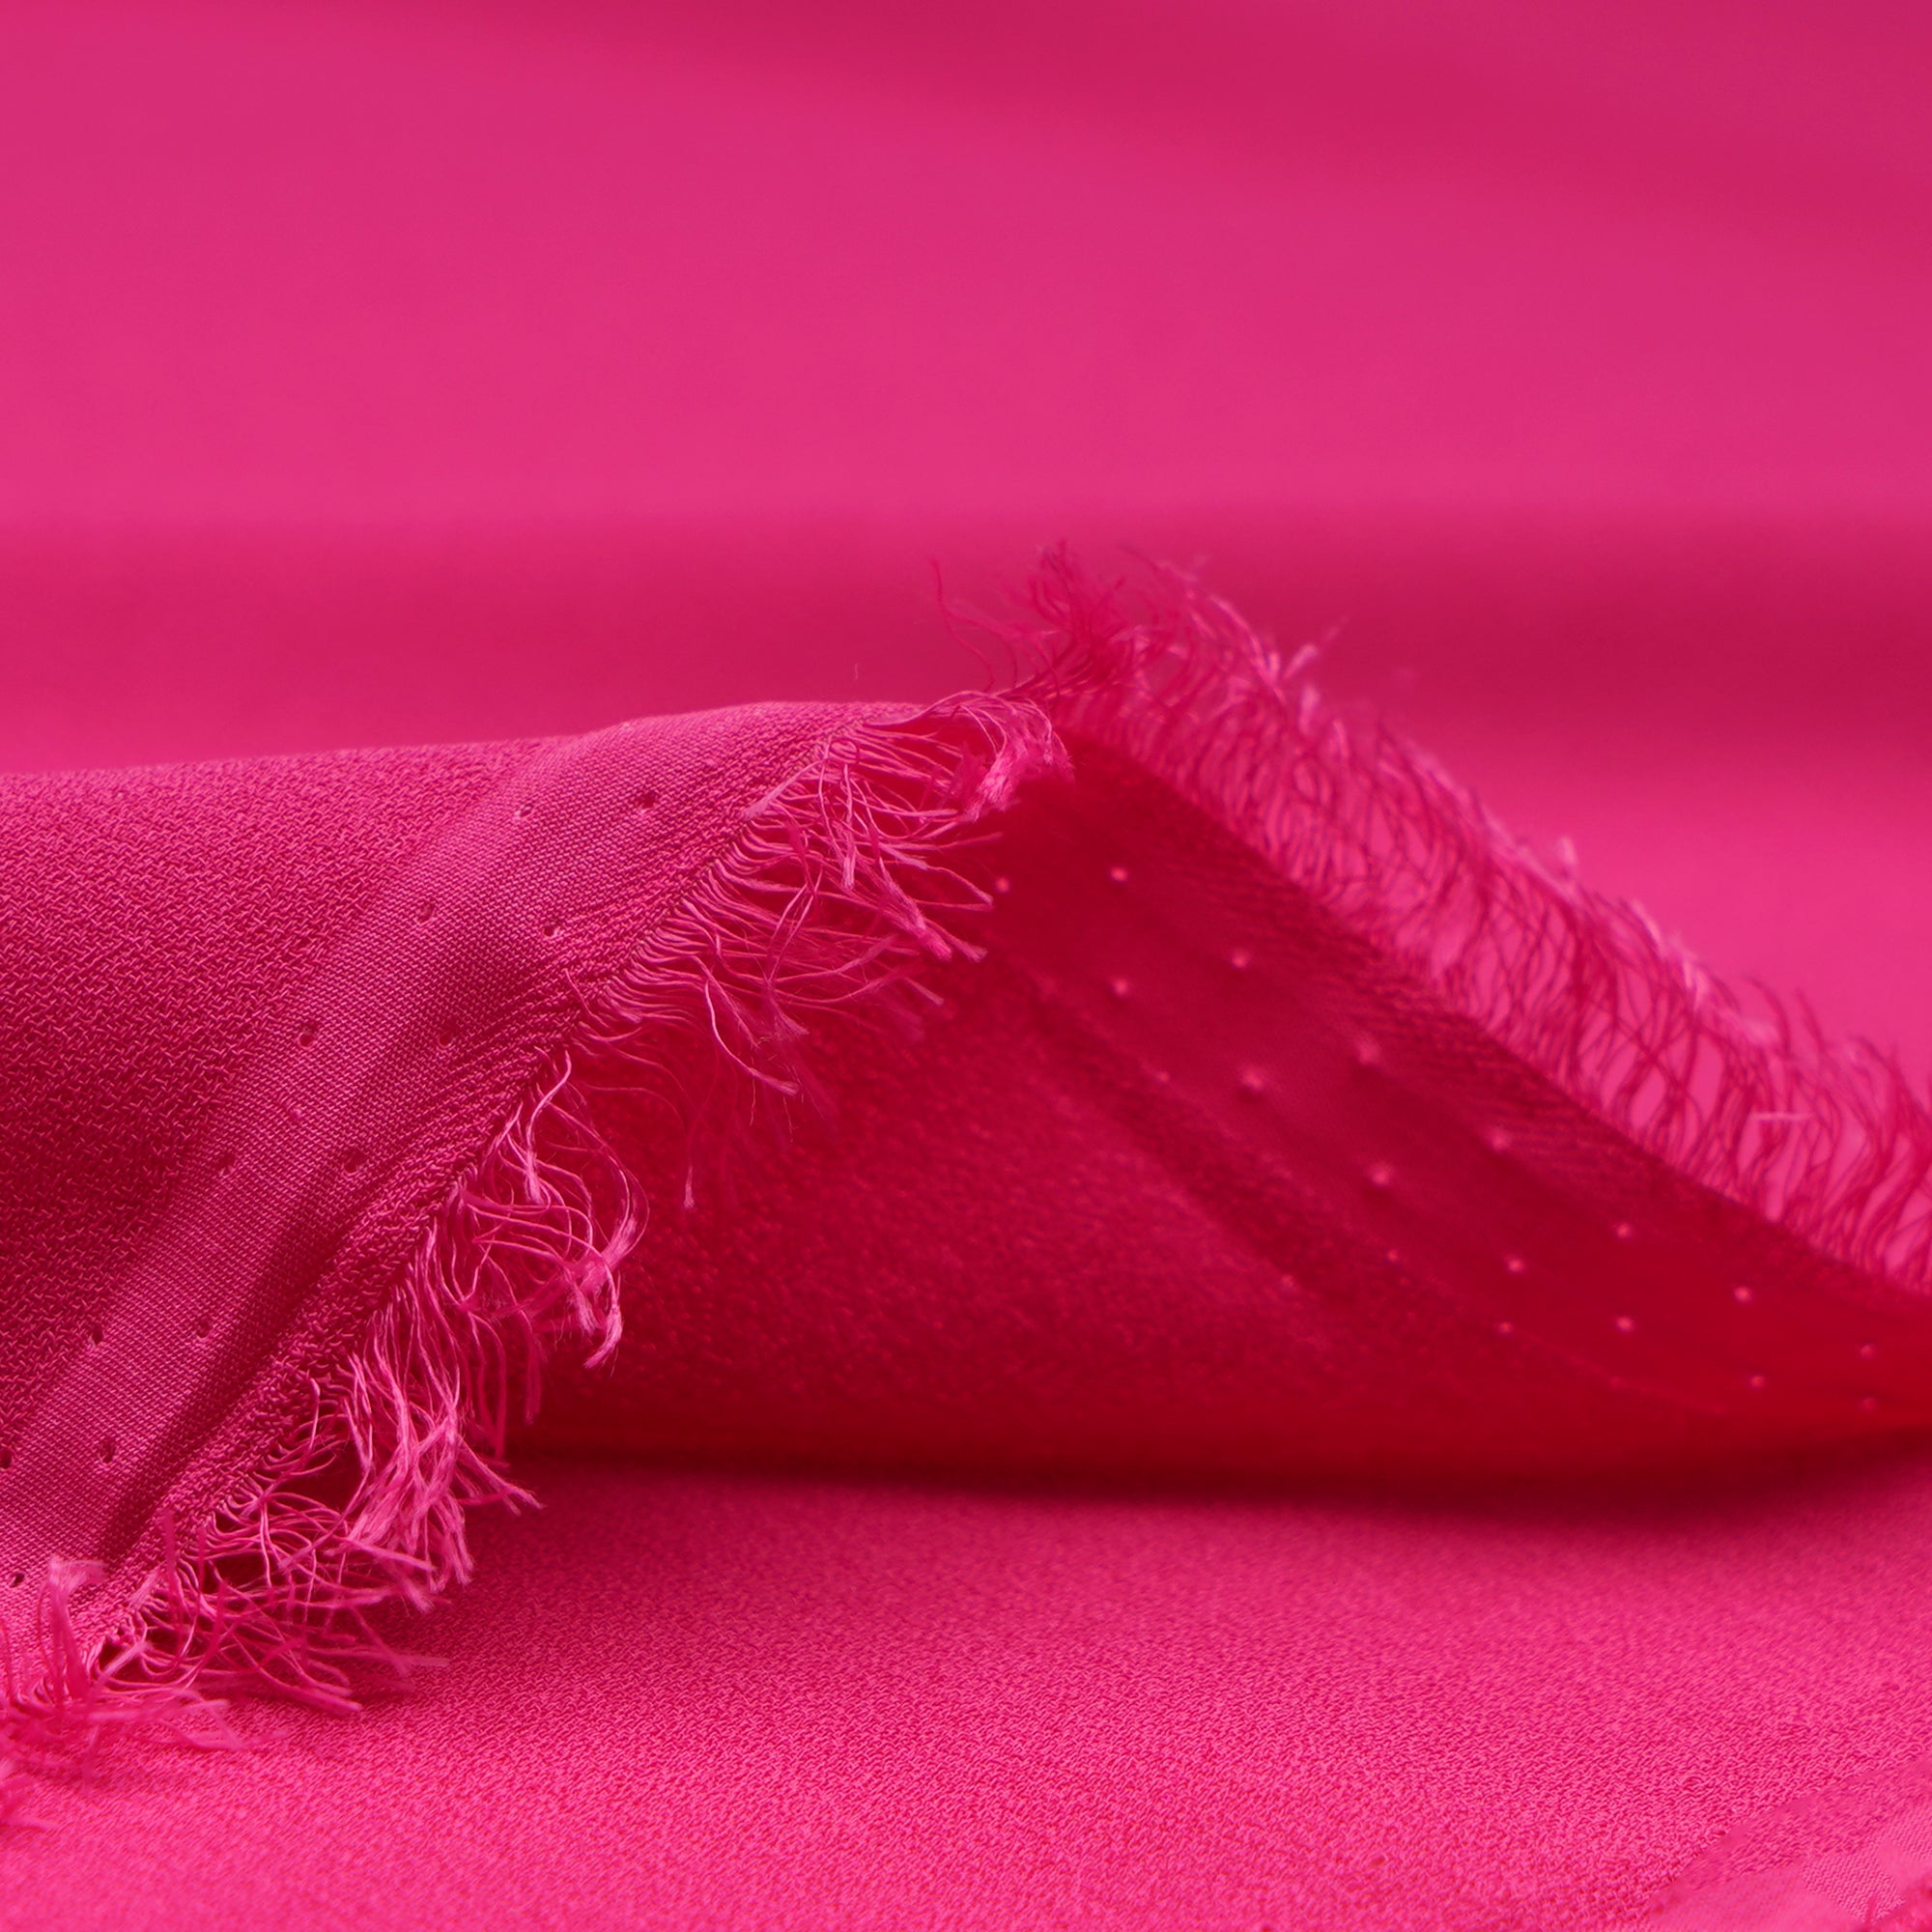 Hot Pink Solid Dyed Imported Royal Georgette Fabric (60" Width)